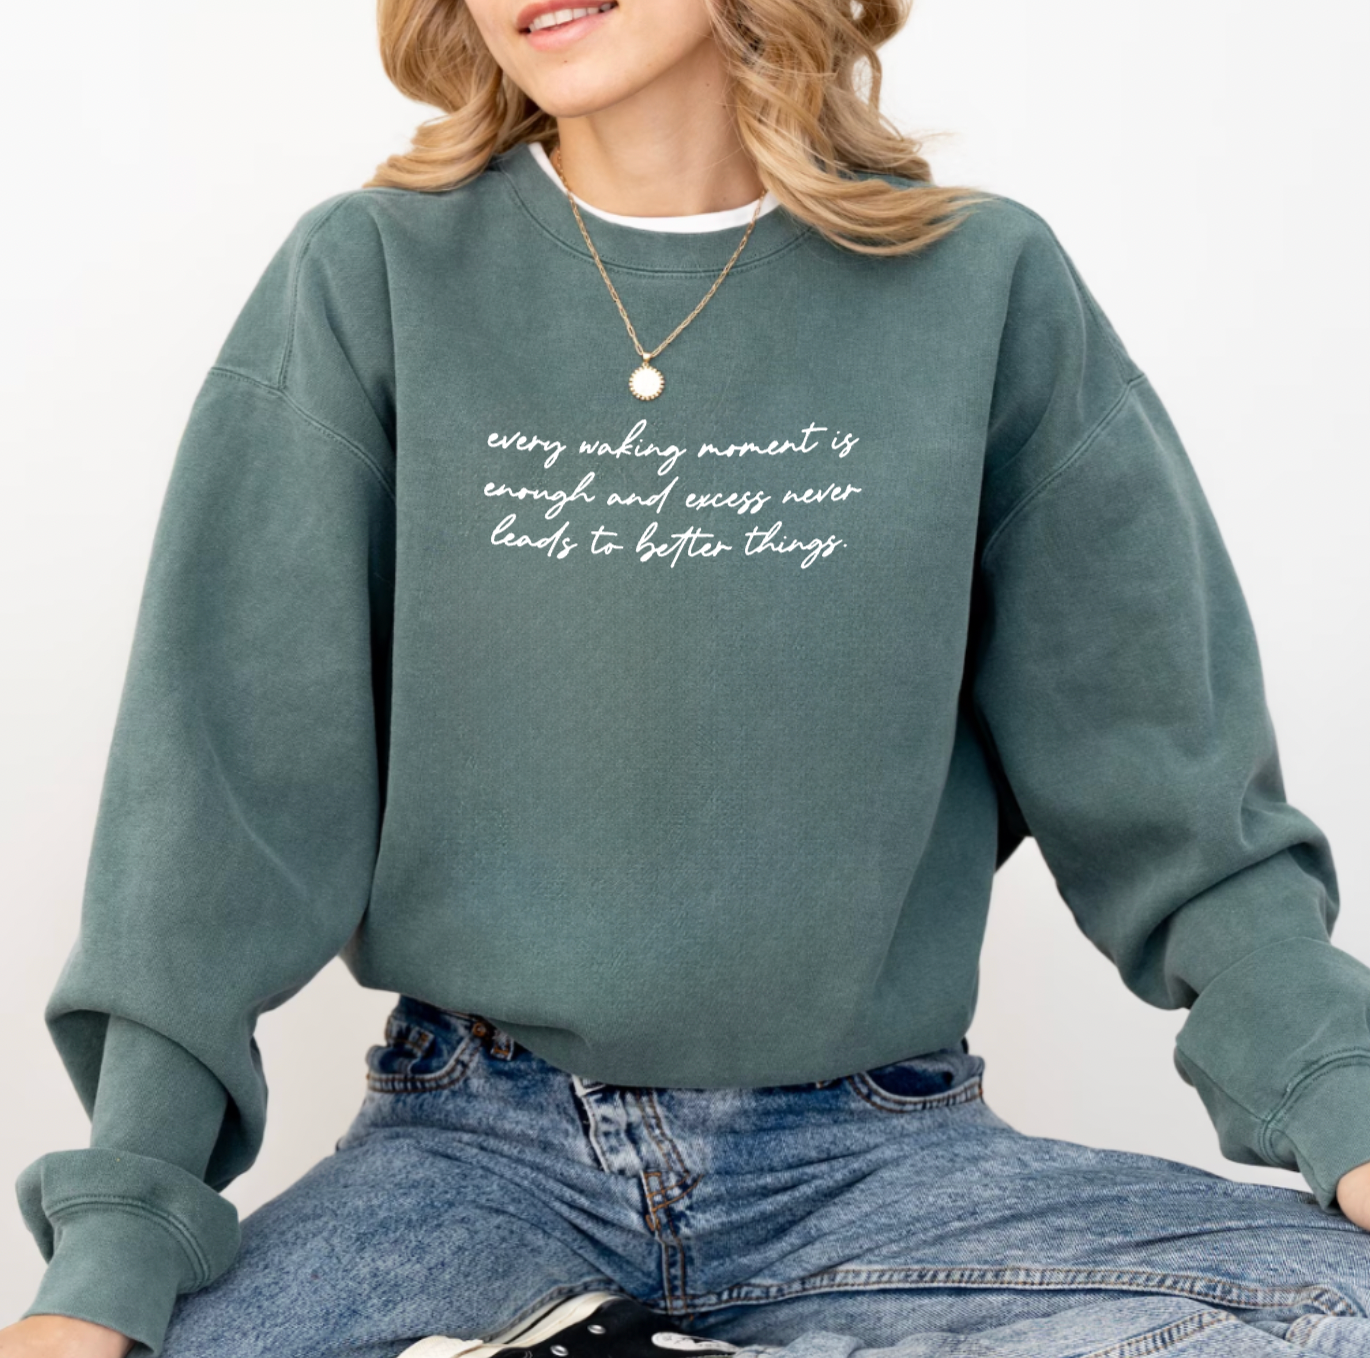 Every Waking Moment Is Enough And Excess Never Leads To Better Things Blue Spruce Crewneck